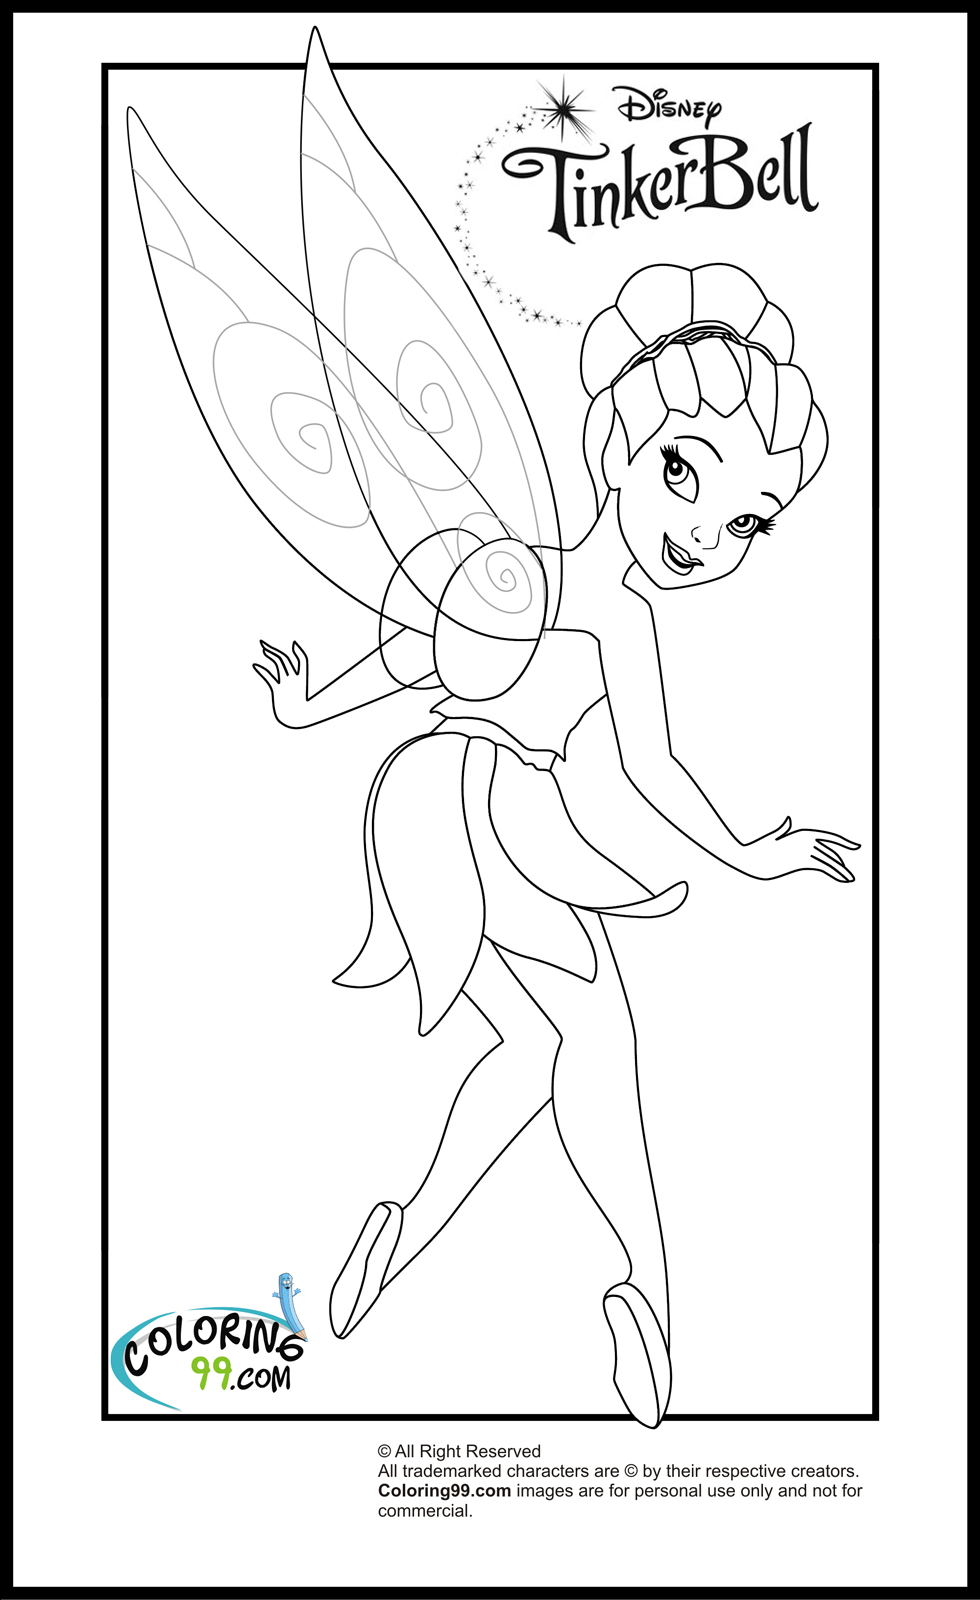 Download Tinkerbell and Friends Coloring Pages | Team colors